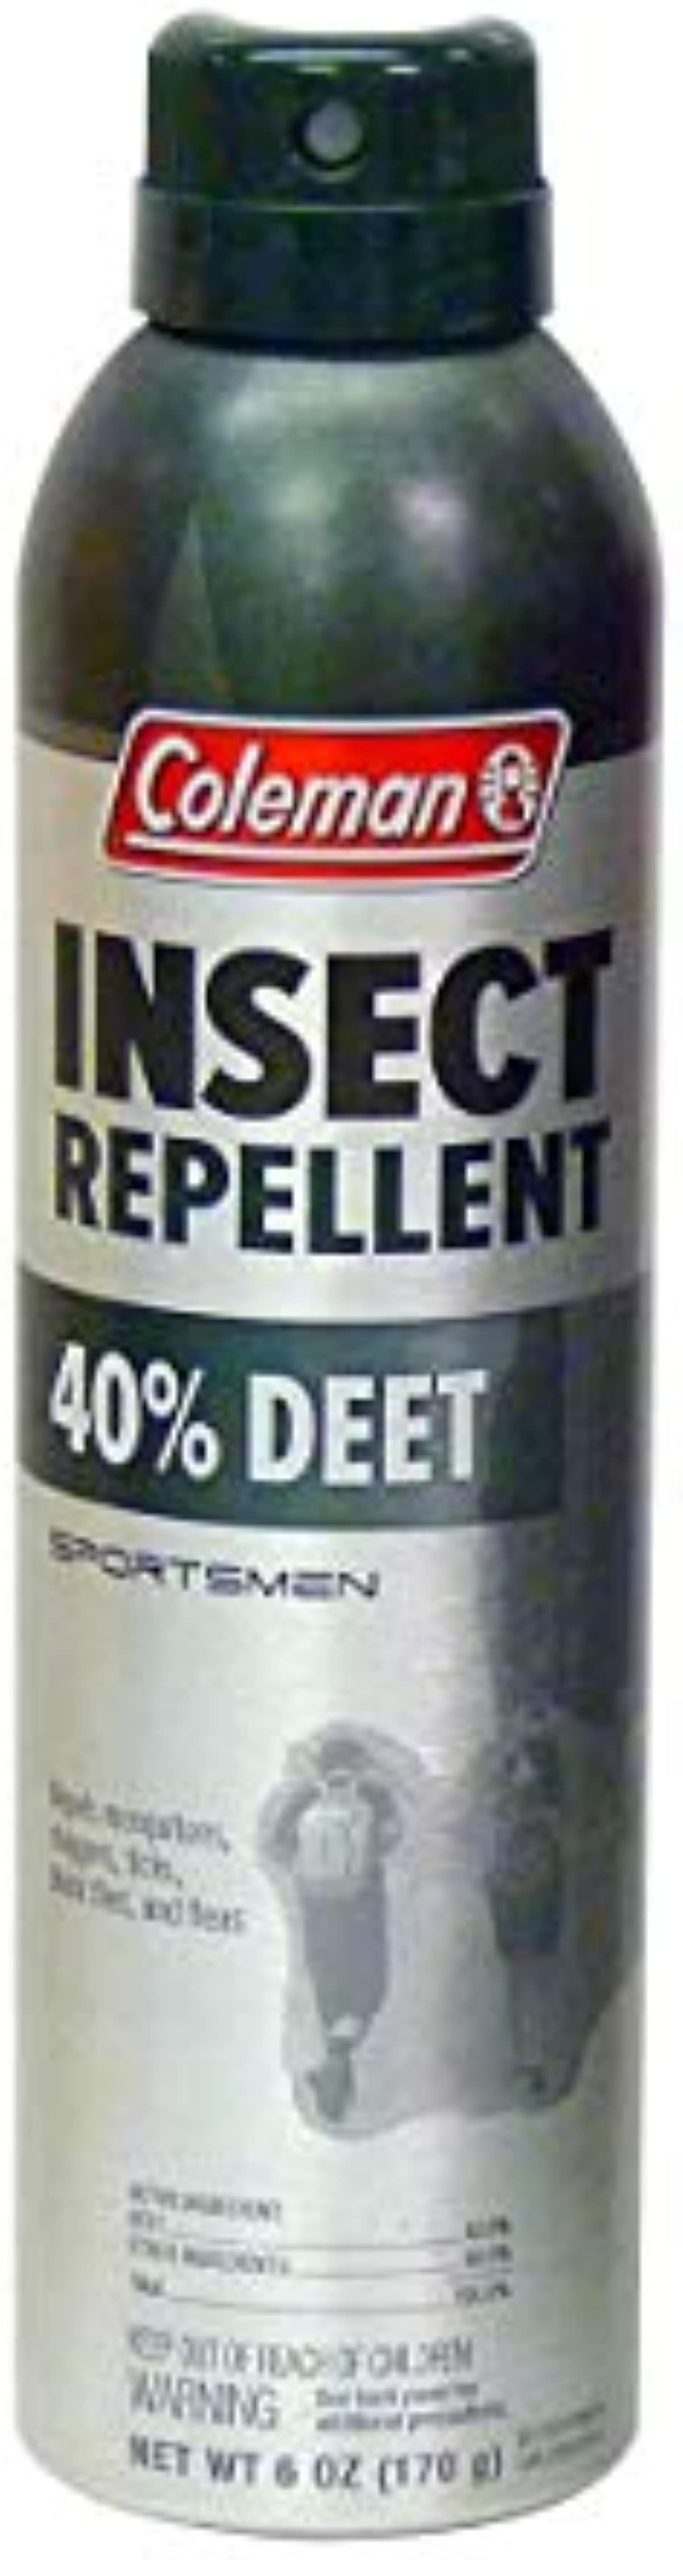 Coleman 40{32738b281d4047e321179ba84fbfac1716d418a350cd035f654346781e806cde} DEET Bug Repellent Spray Insect Repellent Spray